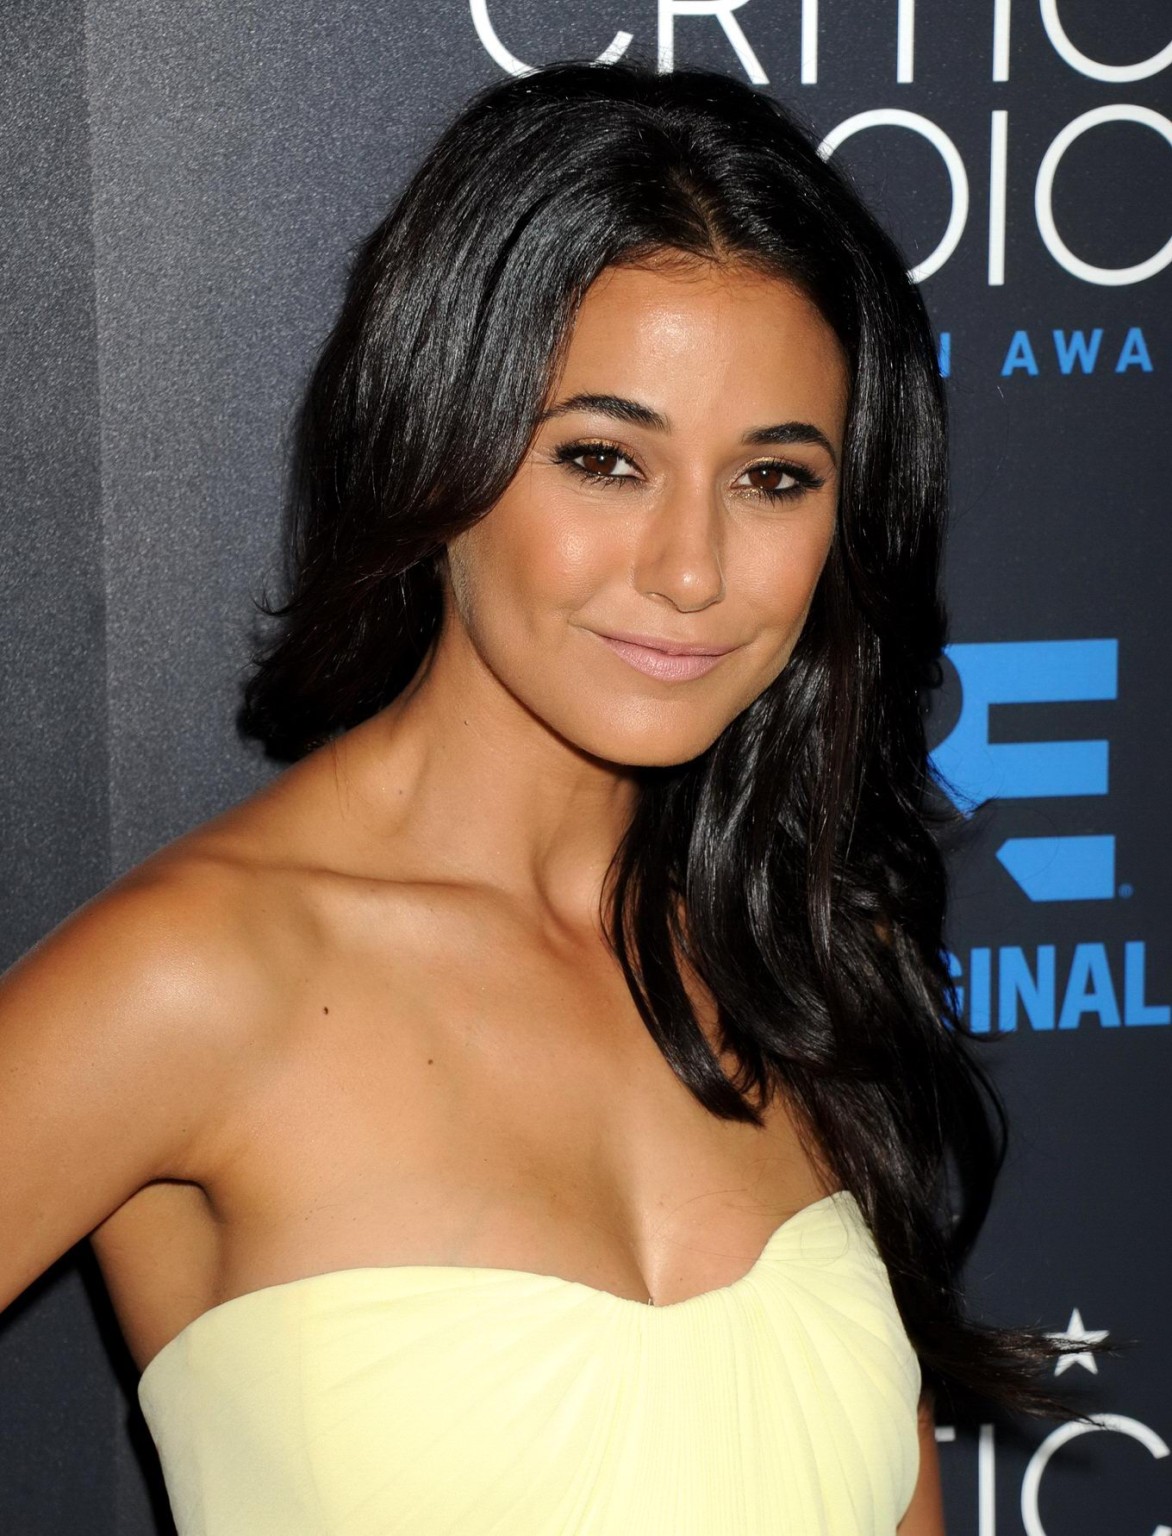 Emmanuelle Chriqui busty wearing a strapless dress at the 5th Annual Critics Cho #75162693